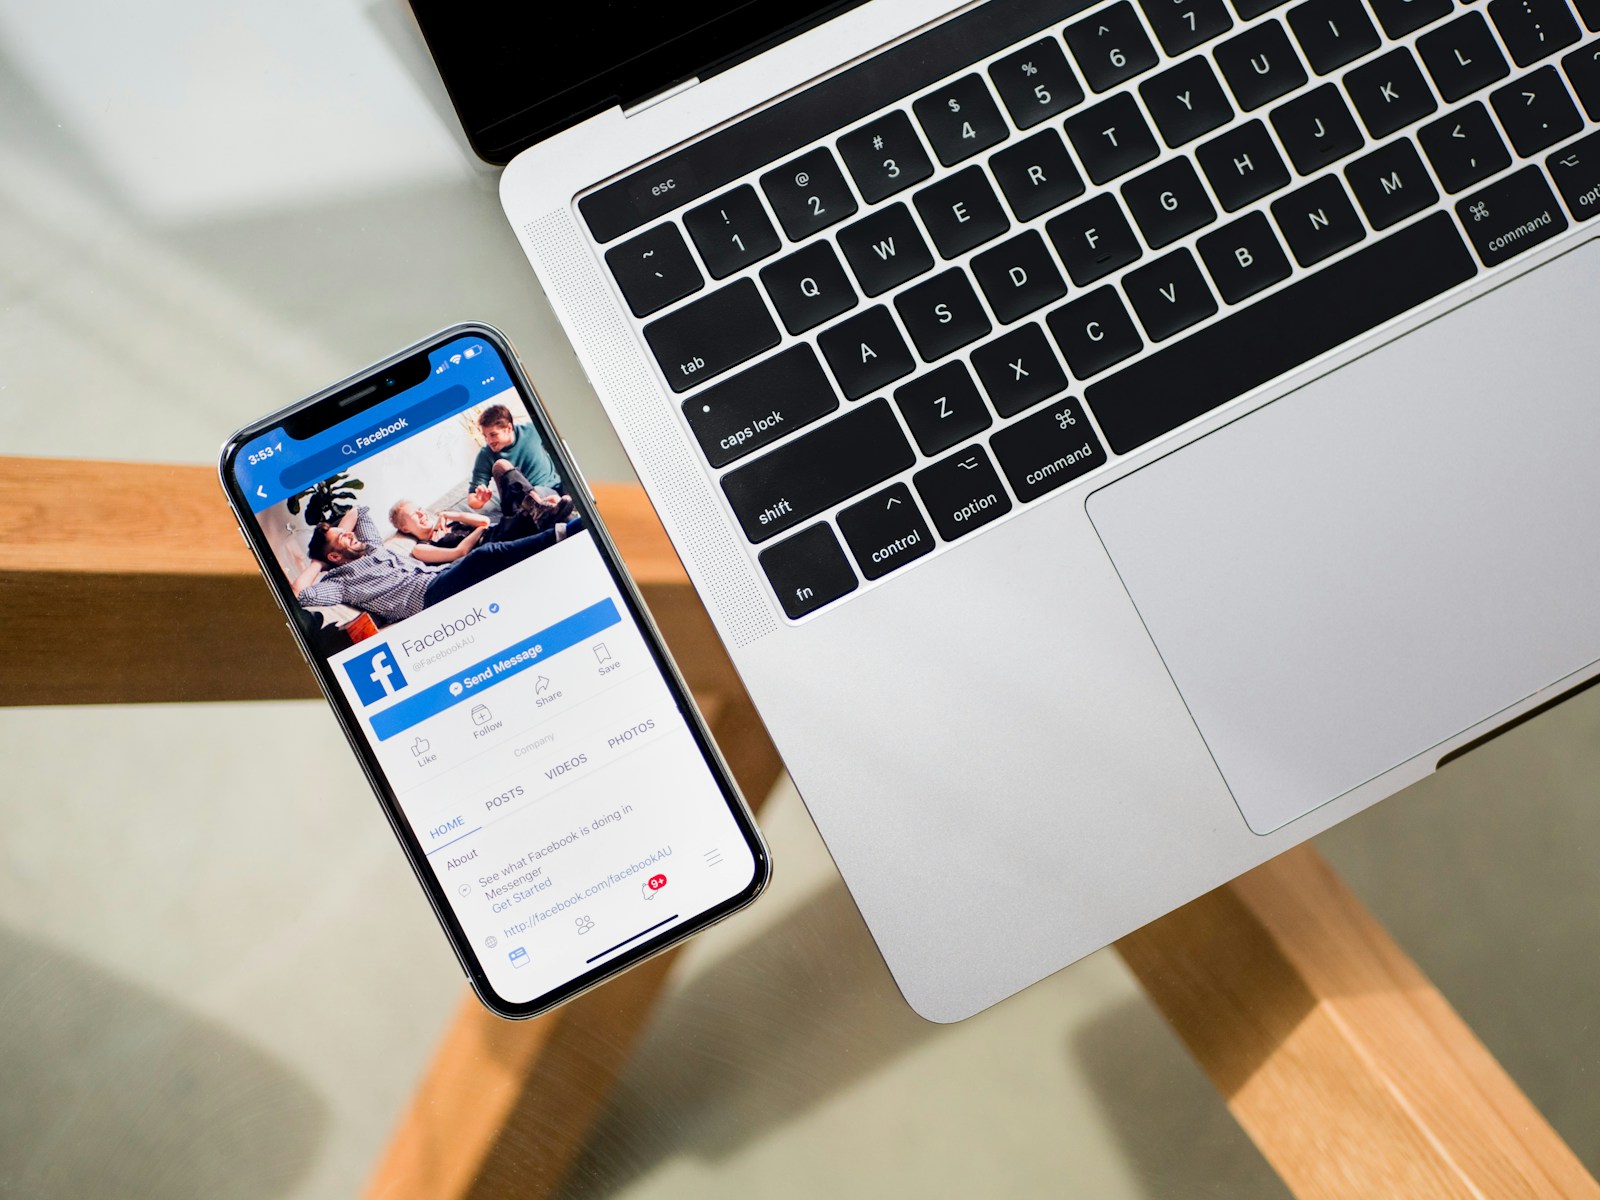 iPhone X beside MacBook, Facebook icon, what to do if Facebook account is hacked